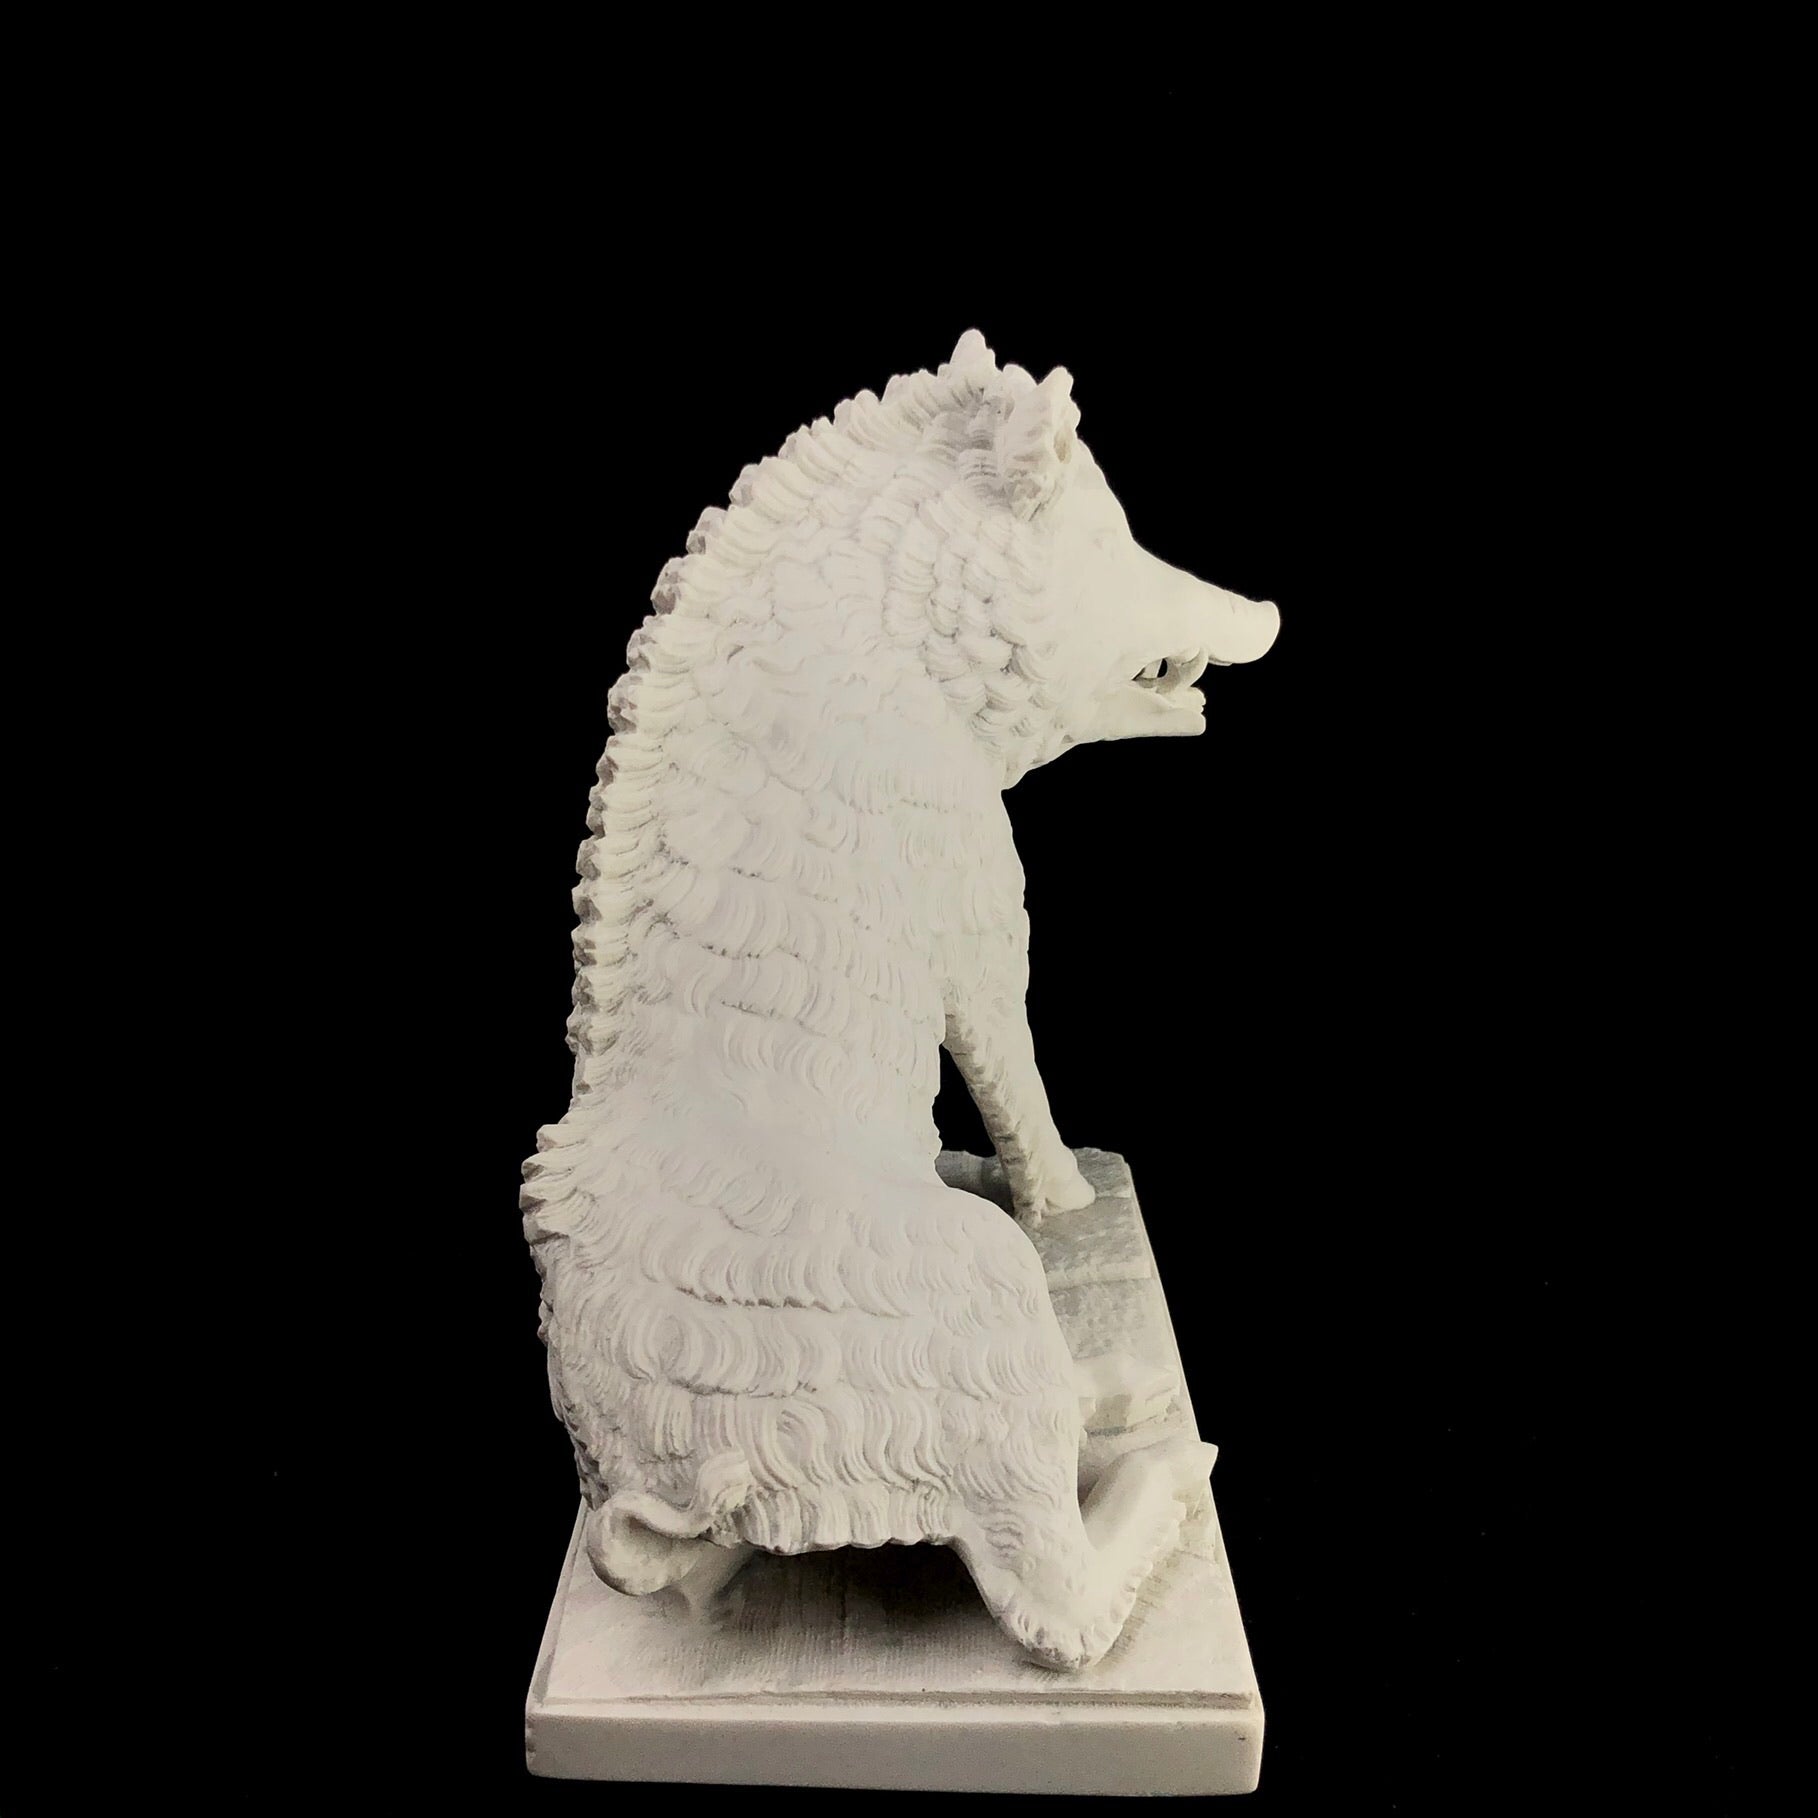 Back side view of Marble Boar Sculpture